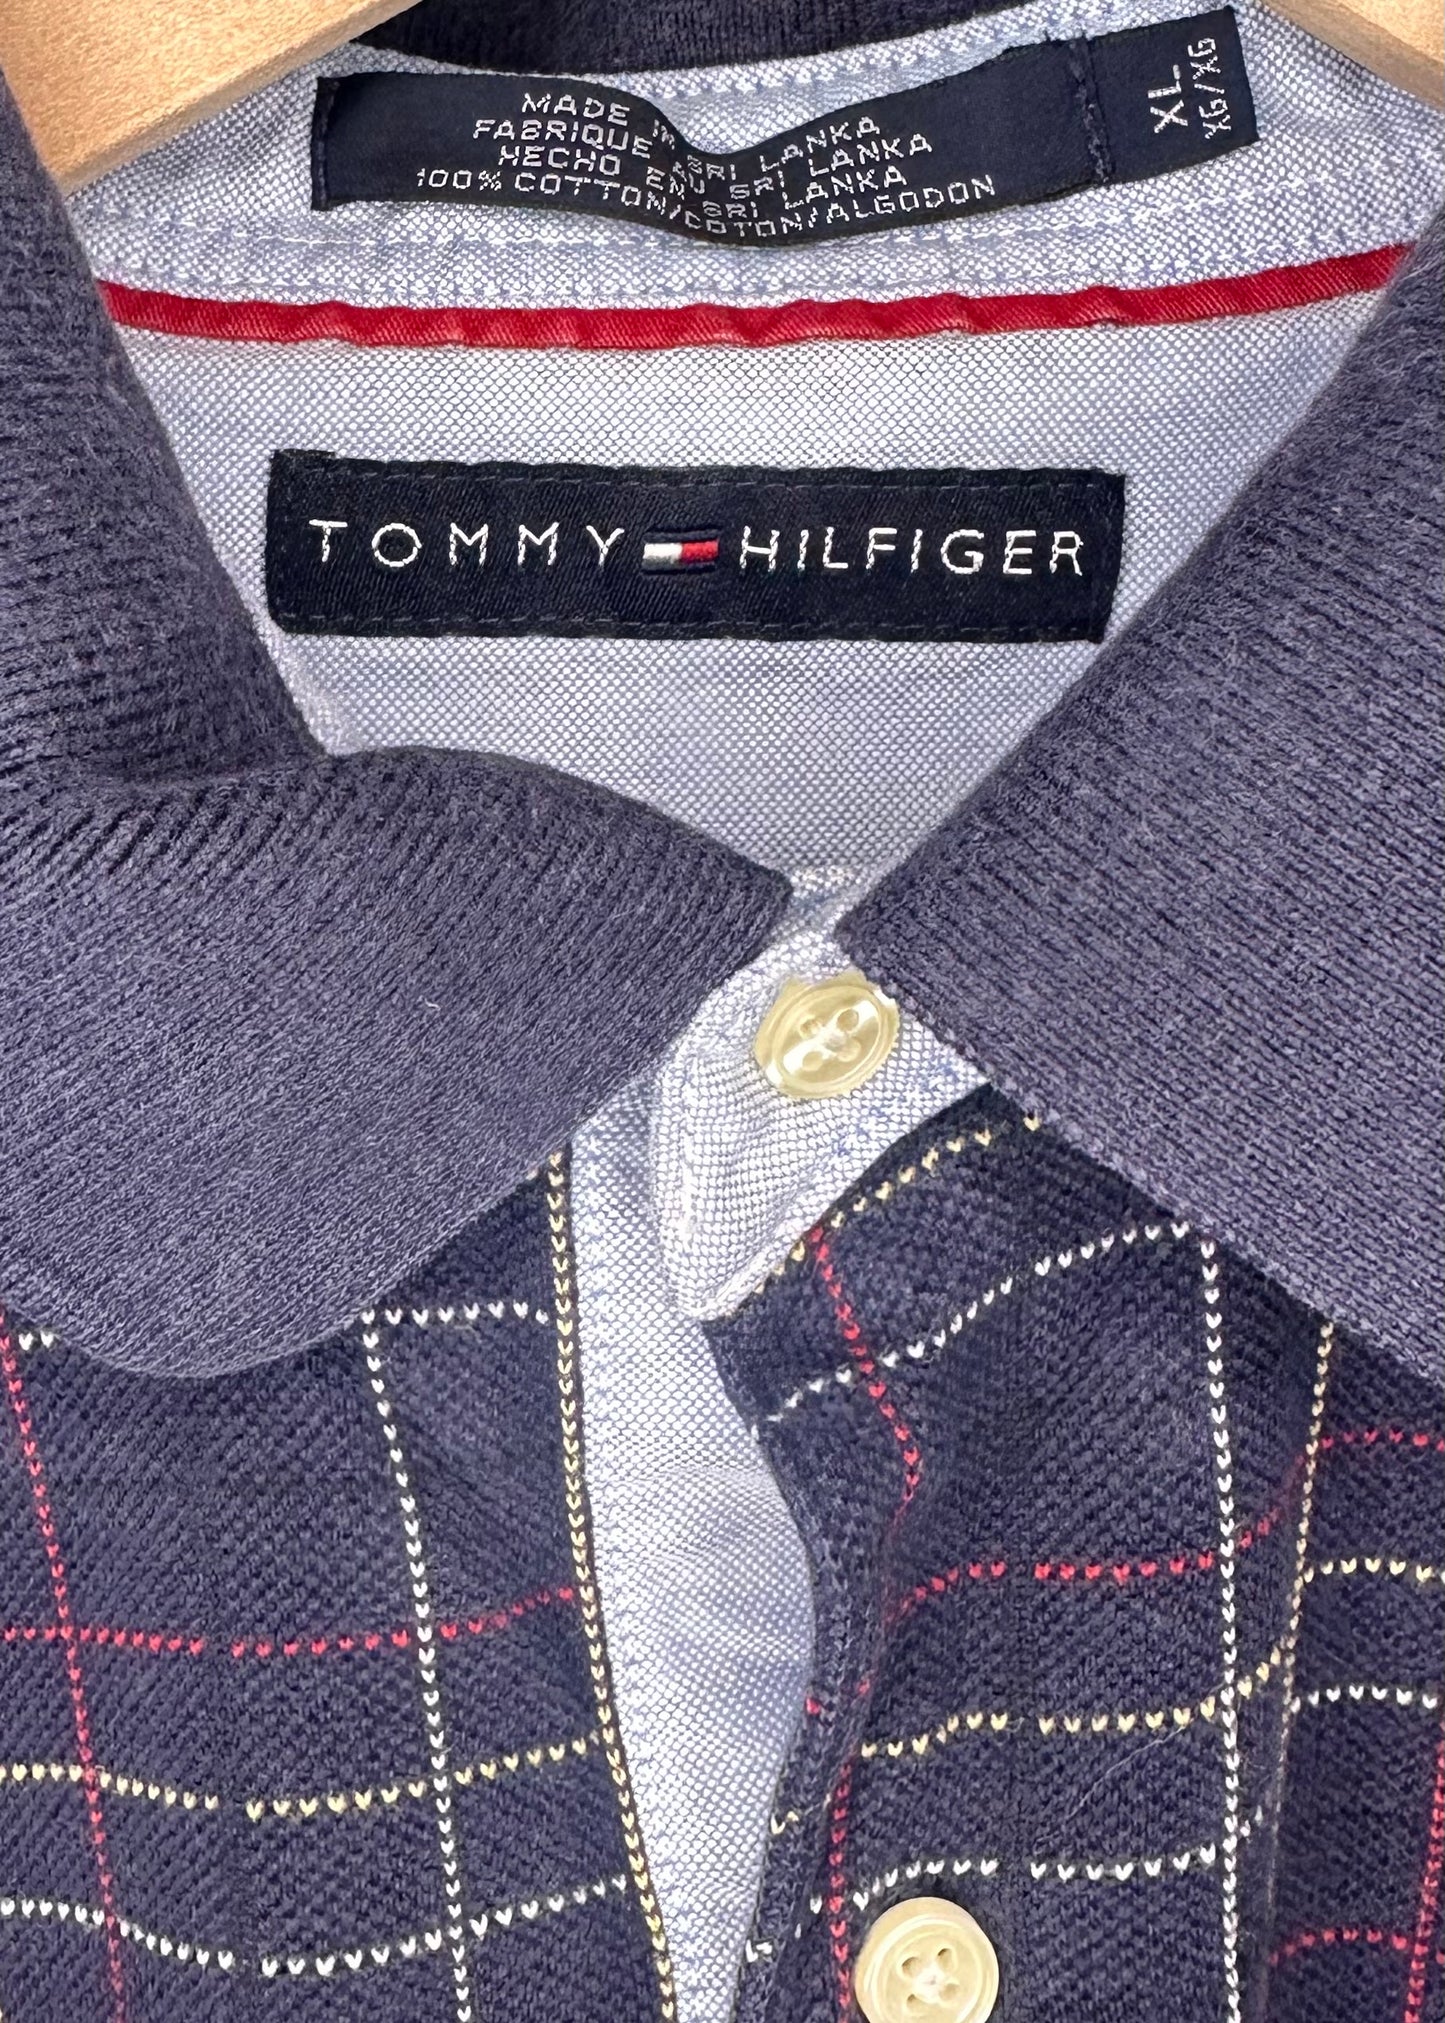 Blue Collar Polo By Tommy Hilfiger